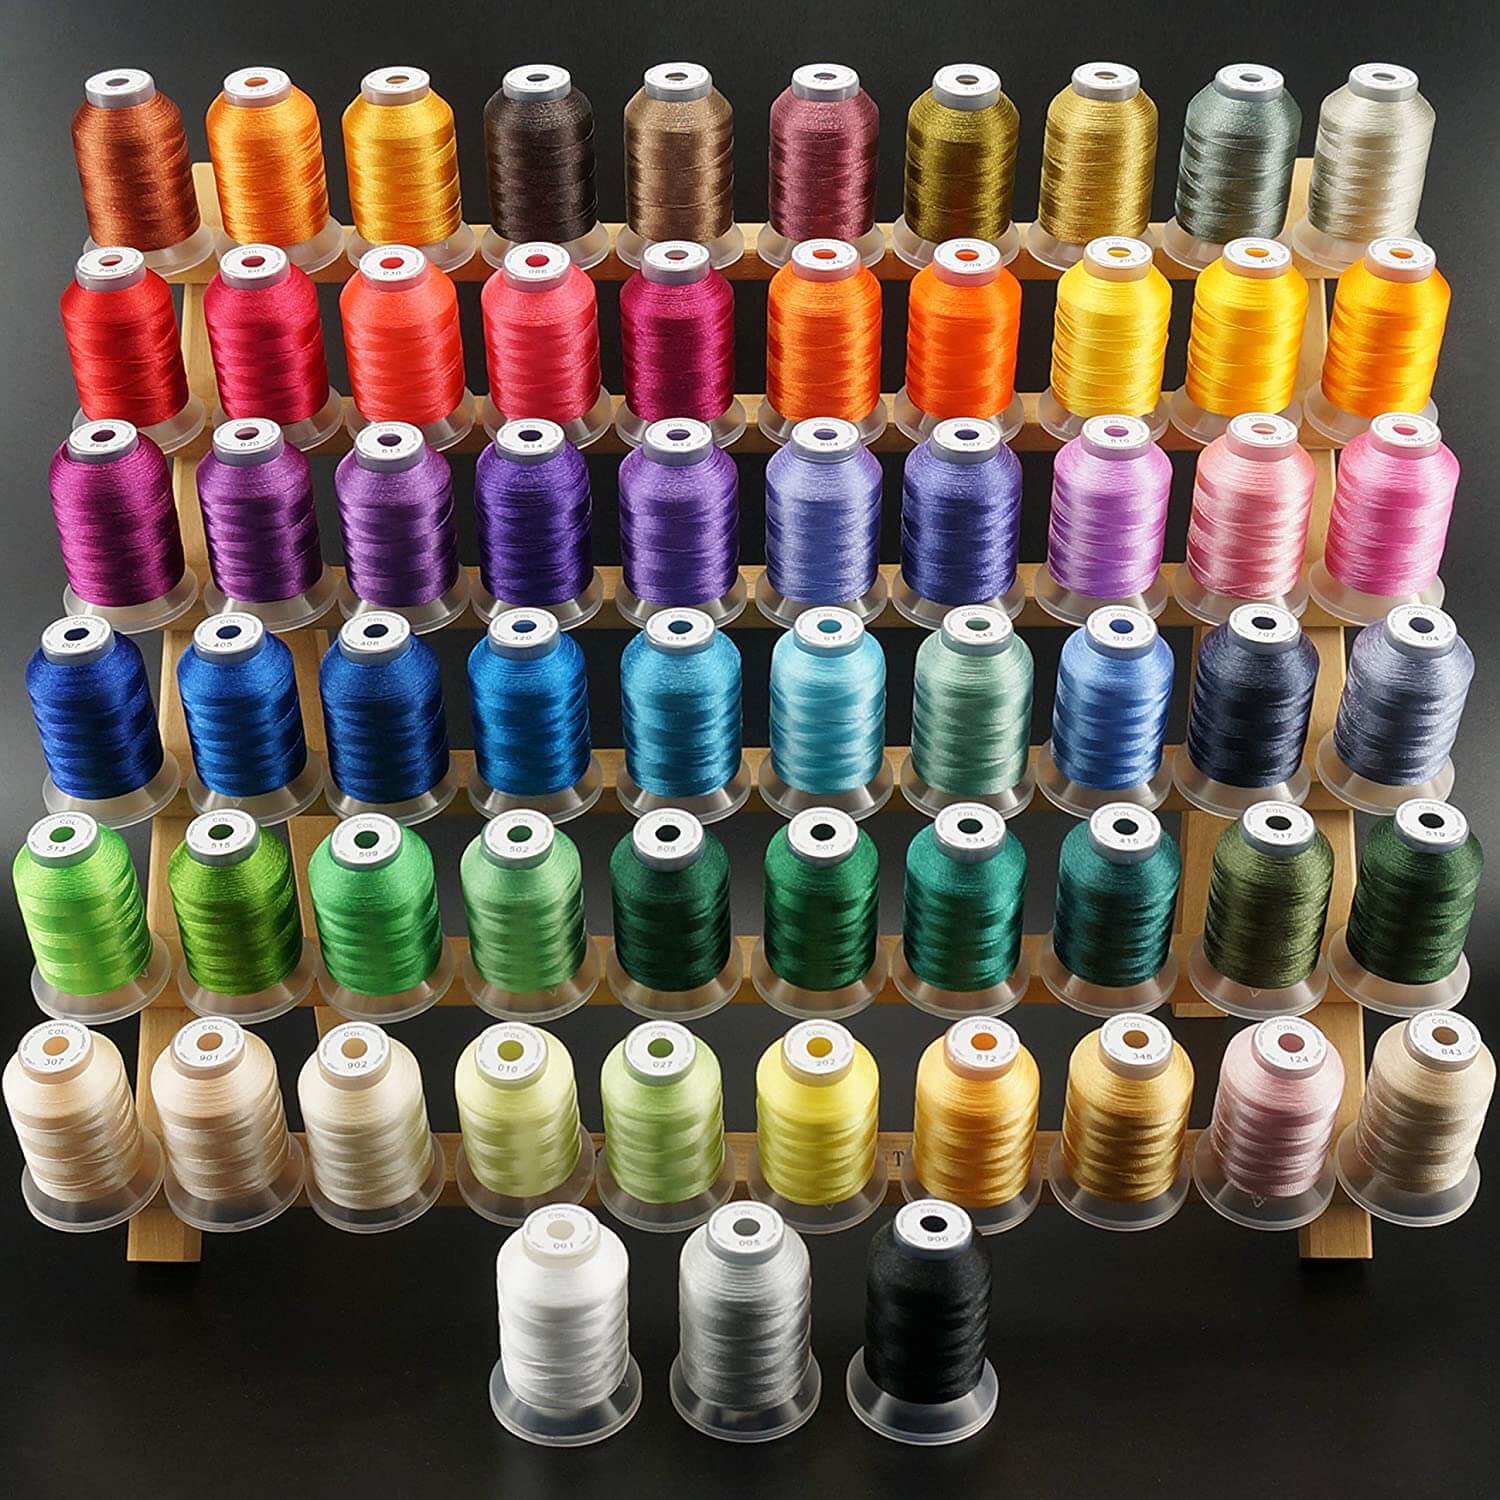 New brothread new brothreads -32 options- various assorted color